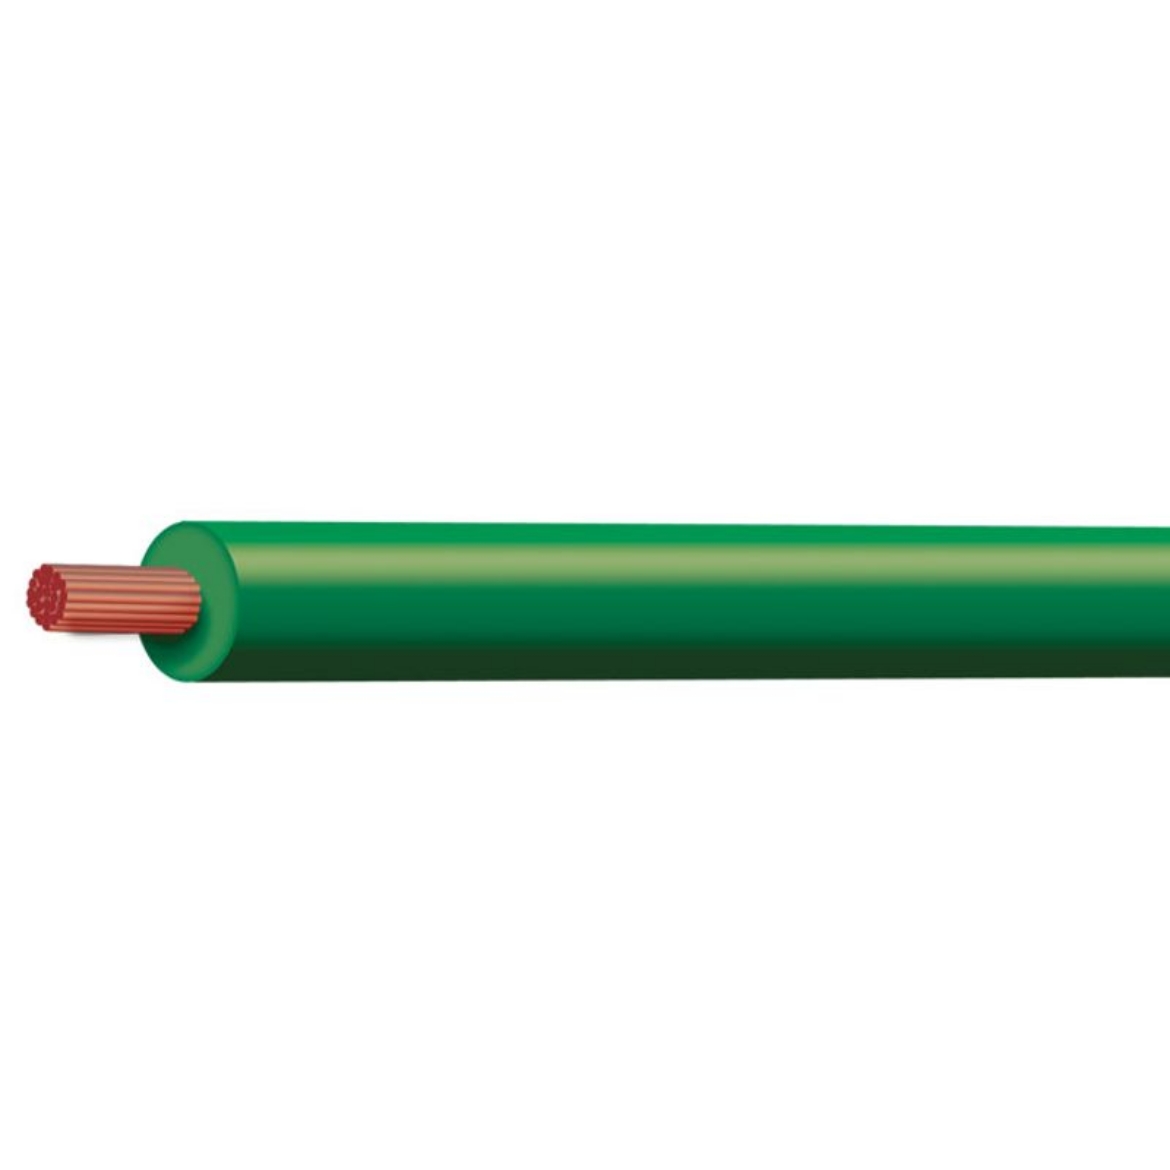 Picture of TYCAB 4MM SINGLE CORE CABLE 15A GREEN - 30M ROLL